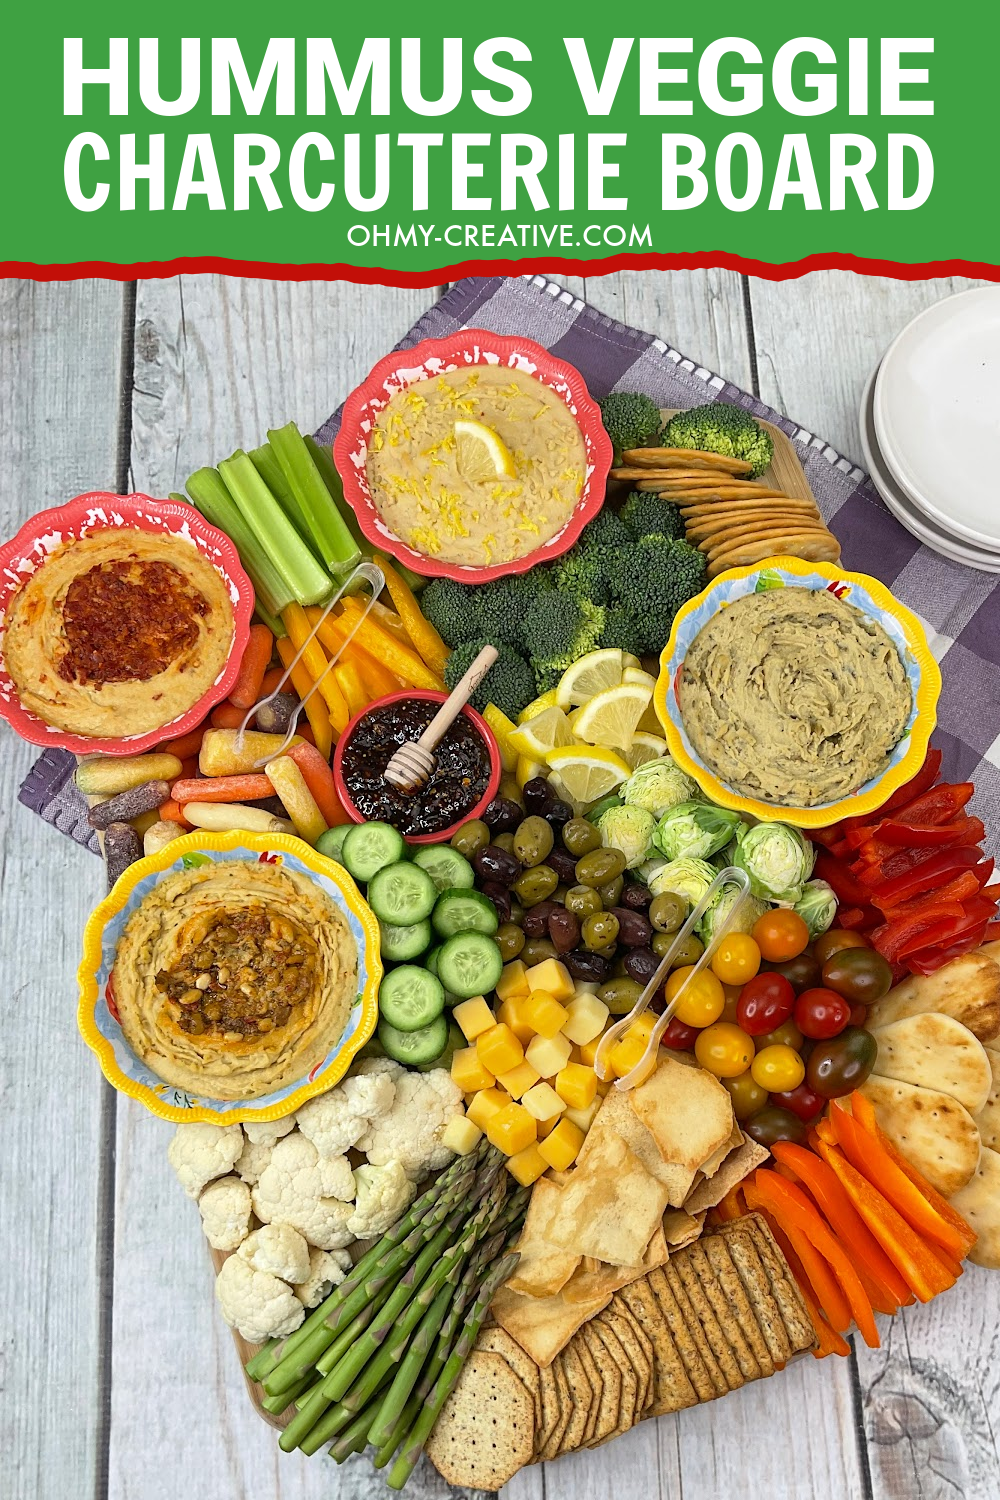 A healthy vegetable veggie charcuterie board that includes several bowls of hummus for dips.